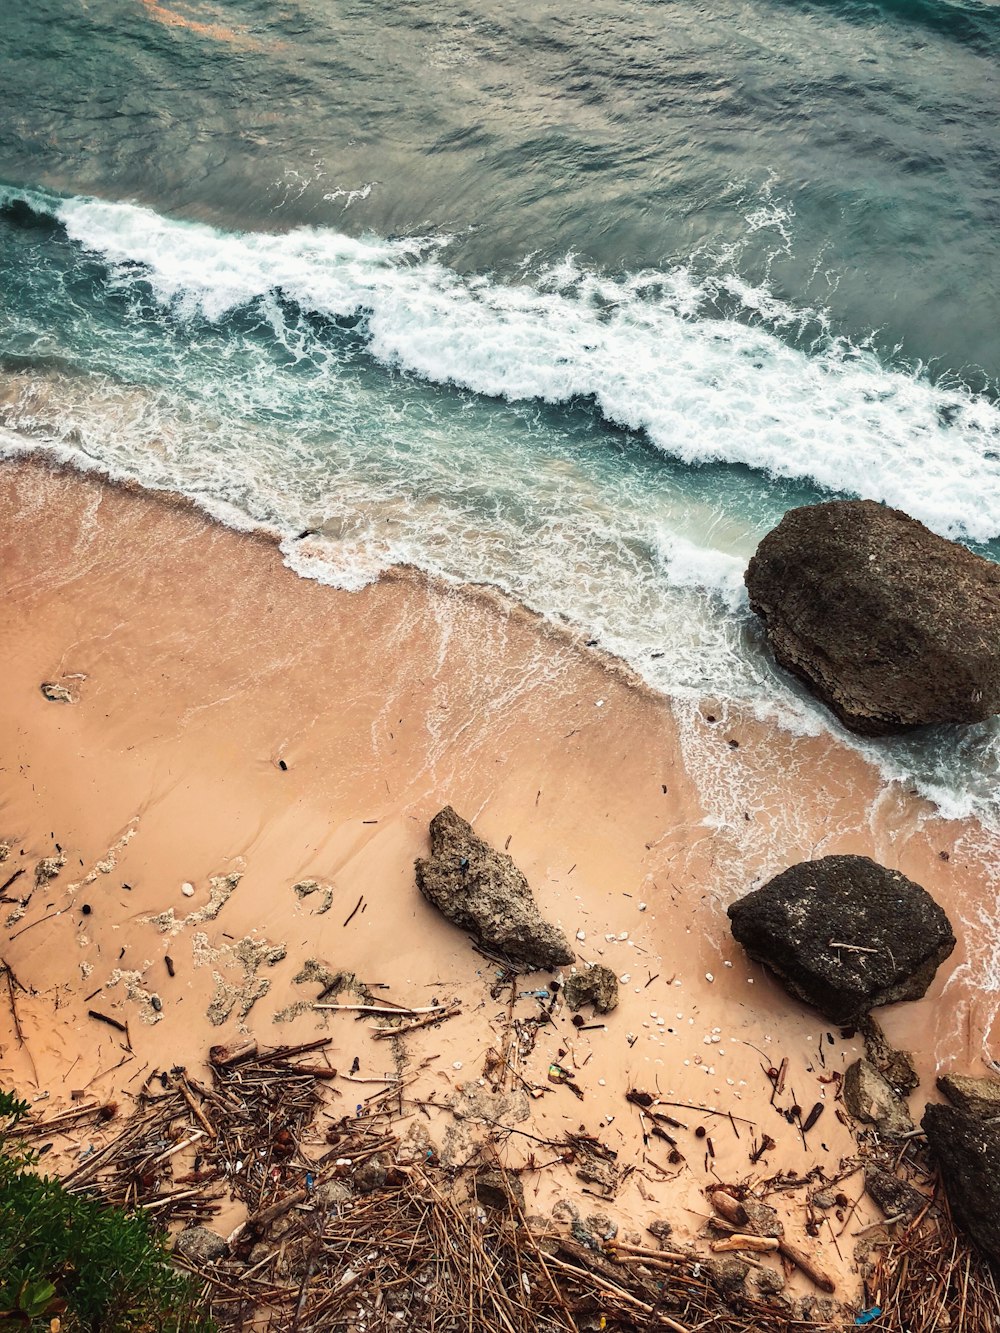 aerial view photography of rocks and wood sticks on shore near ocean during daytime